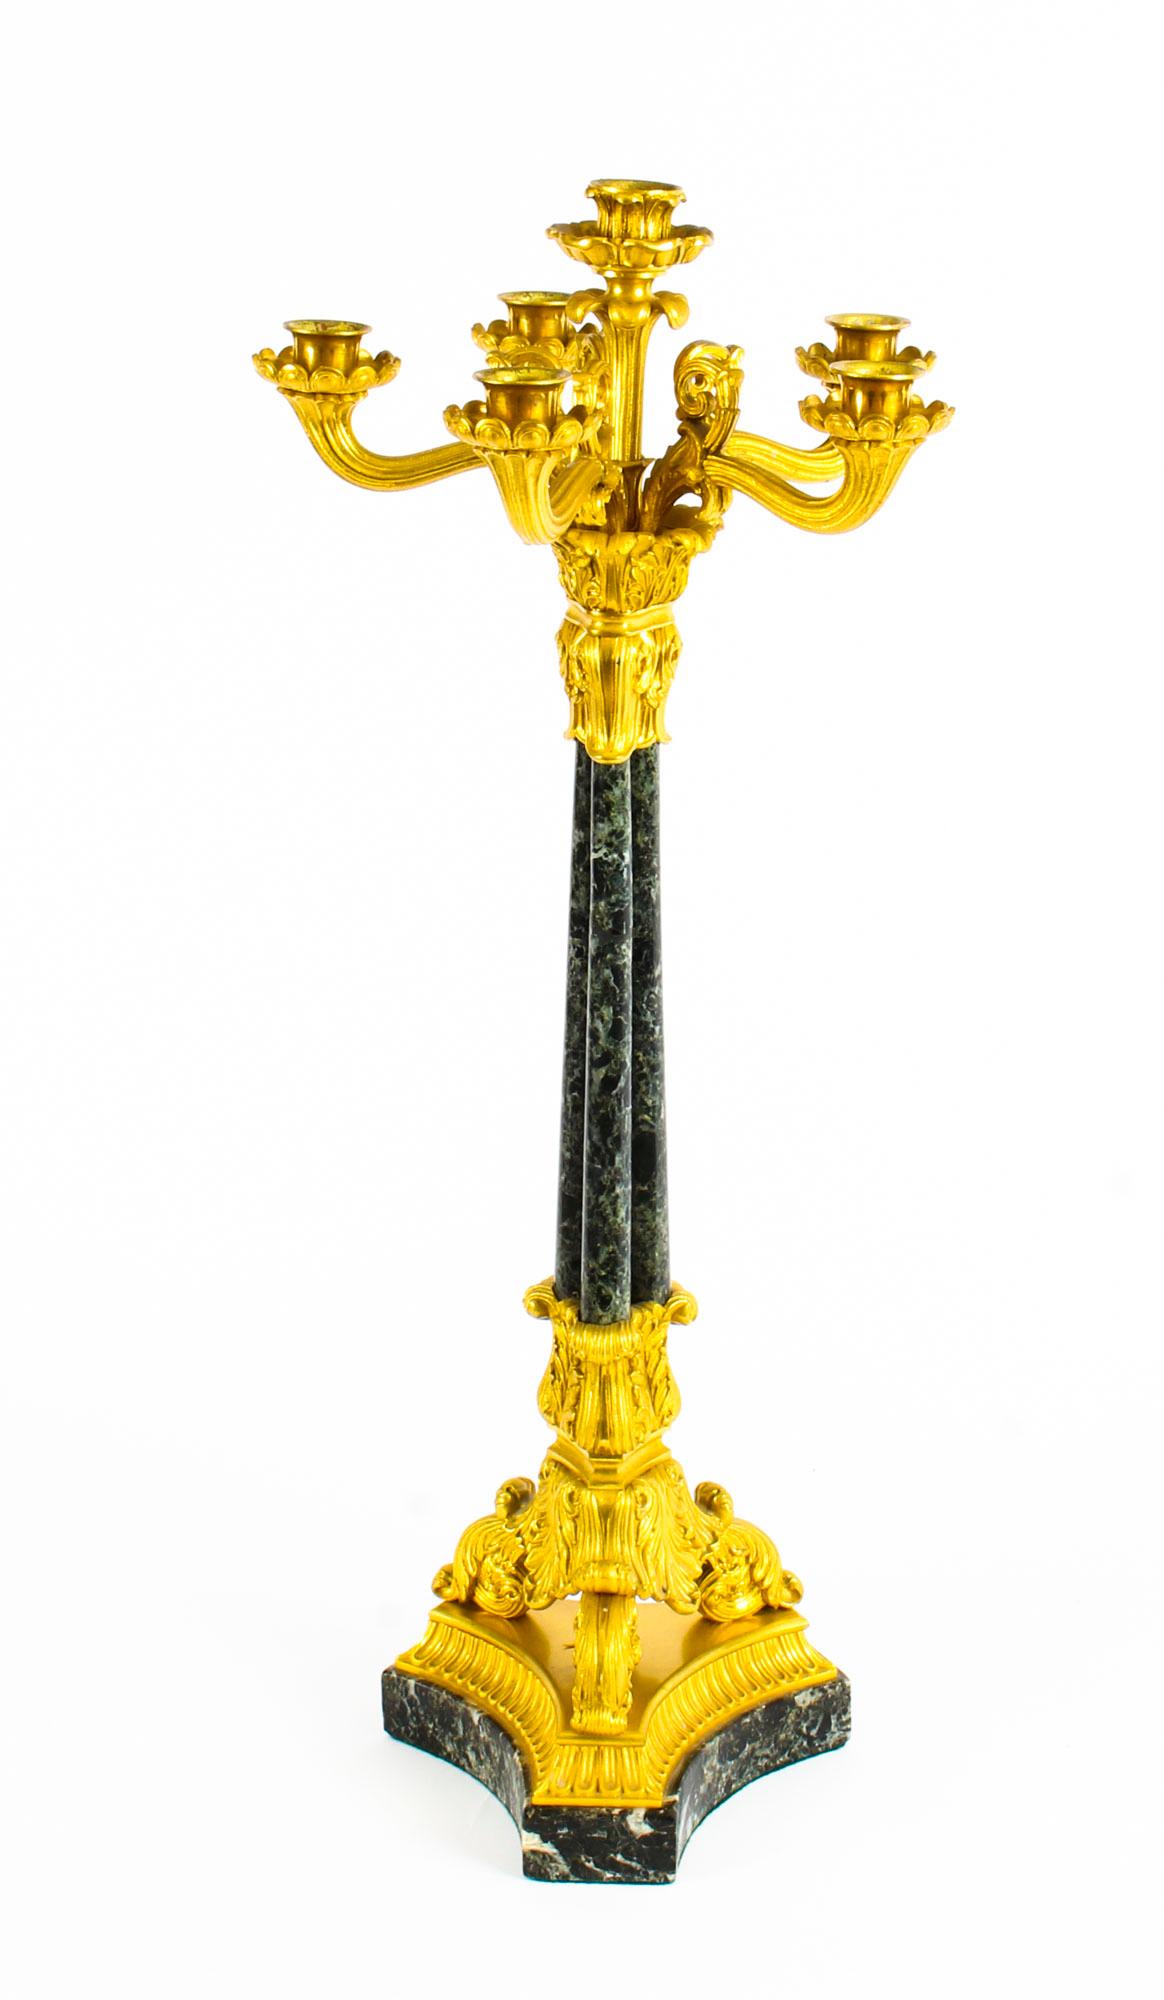 A large and magnificent antique pair of French gilt bronze ormolu and Verde Antico marble six-light candelabra, circa 1850 in date.

The candelabra each feature five reeded scrolling arms with scalloped drip pans and turned nozzles surmounted by a